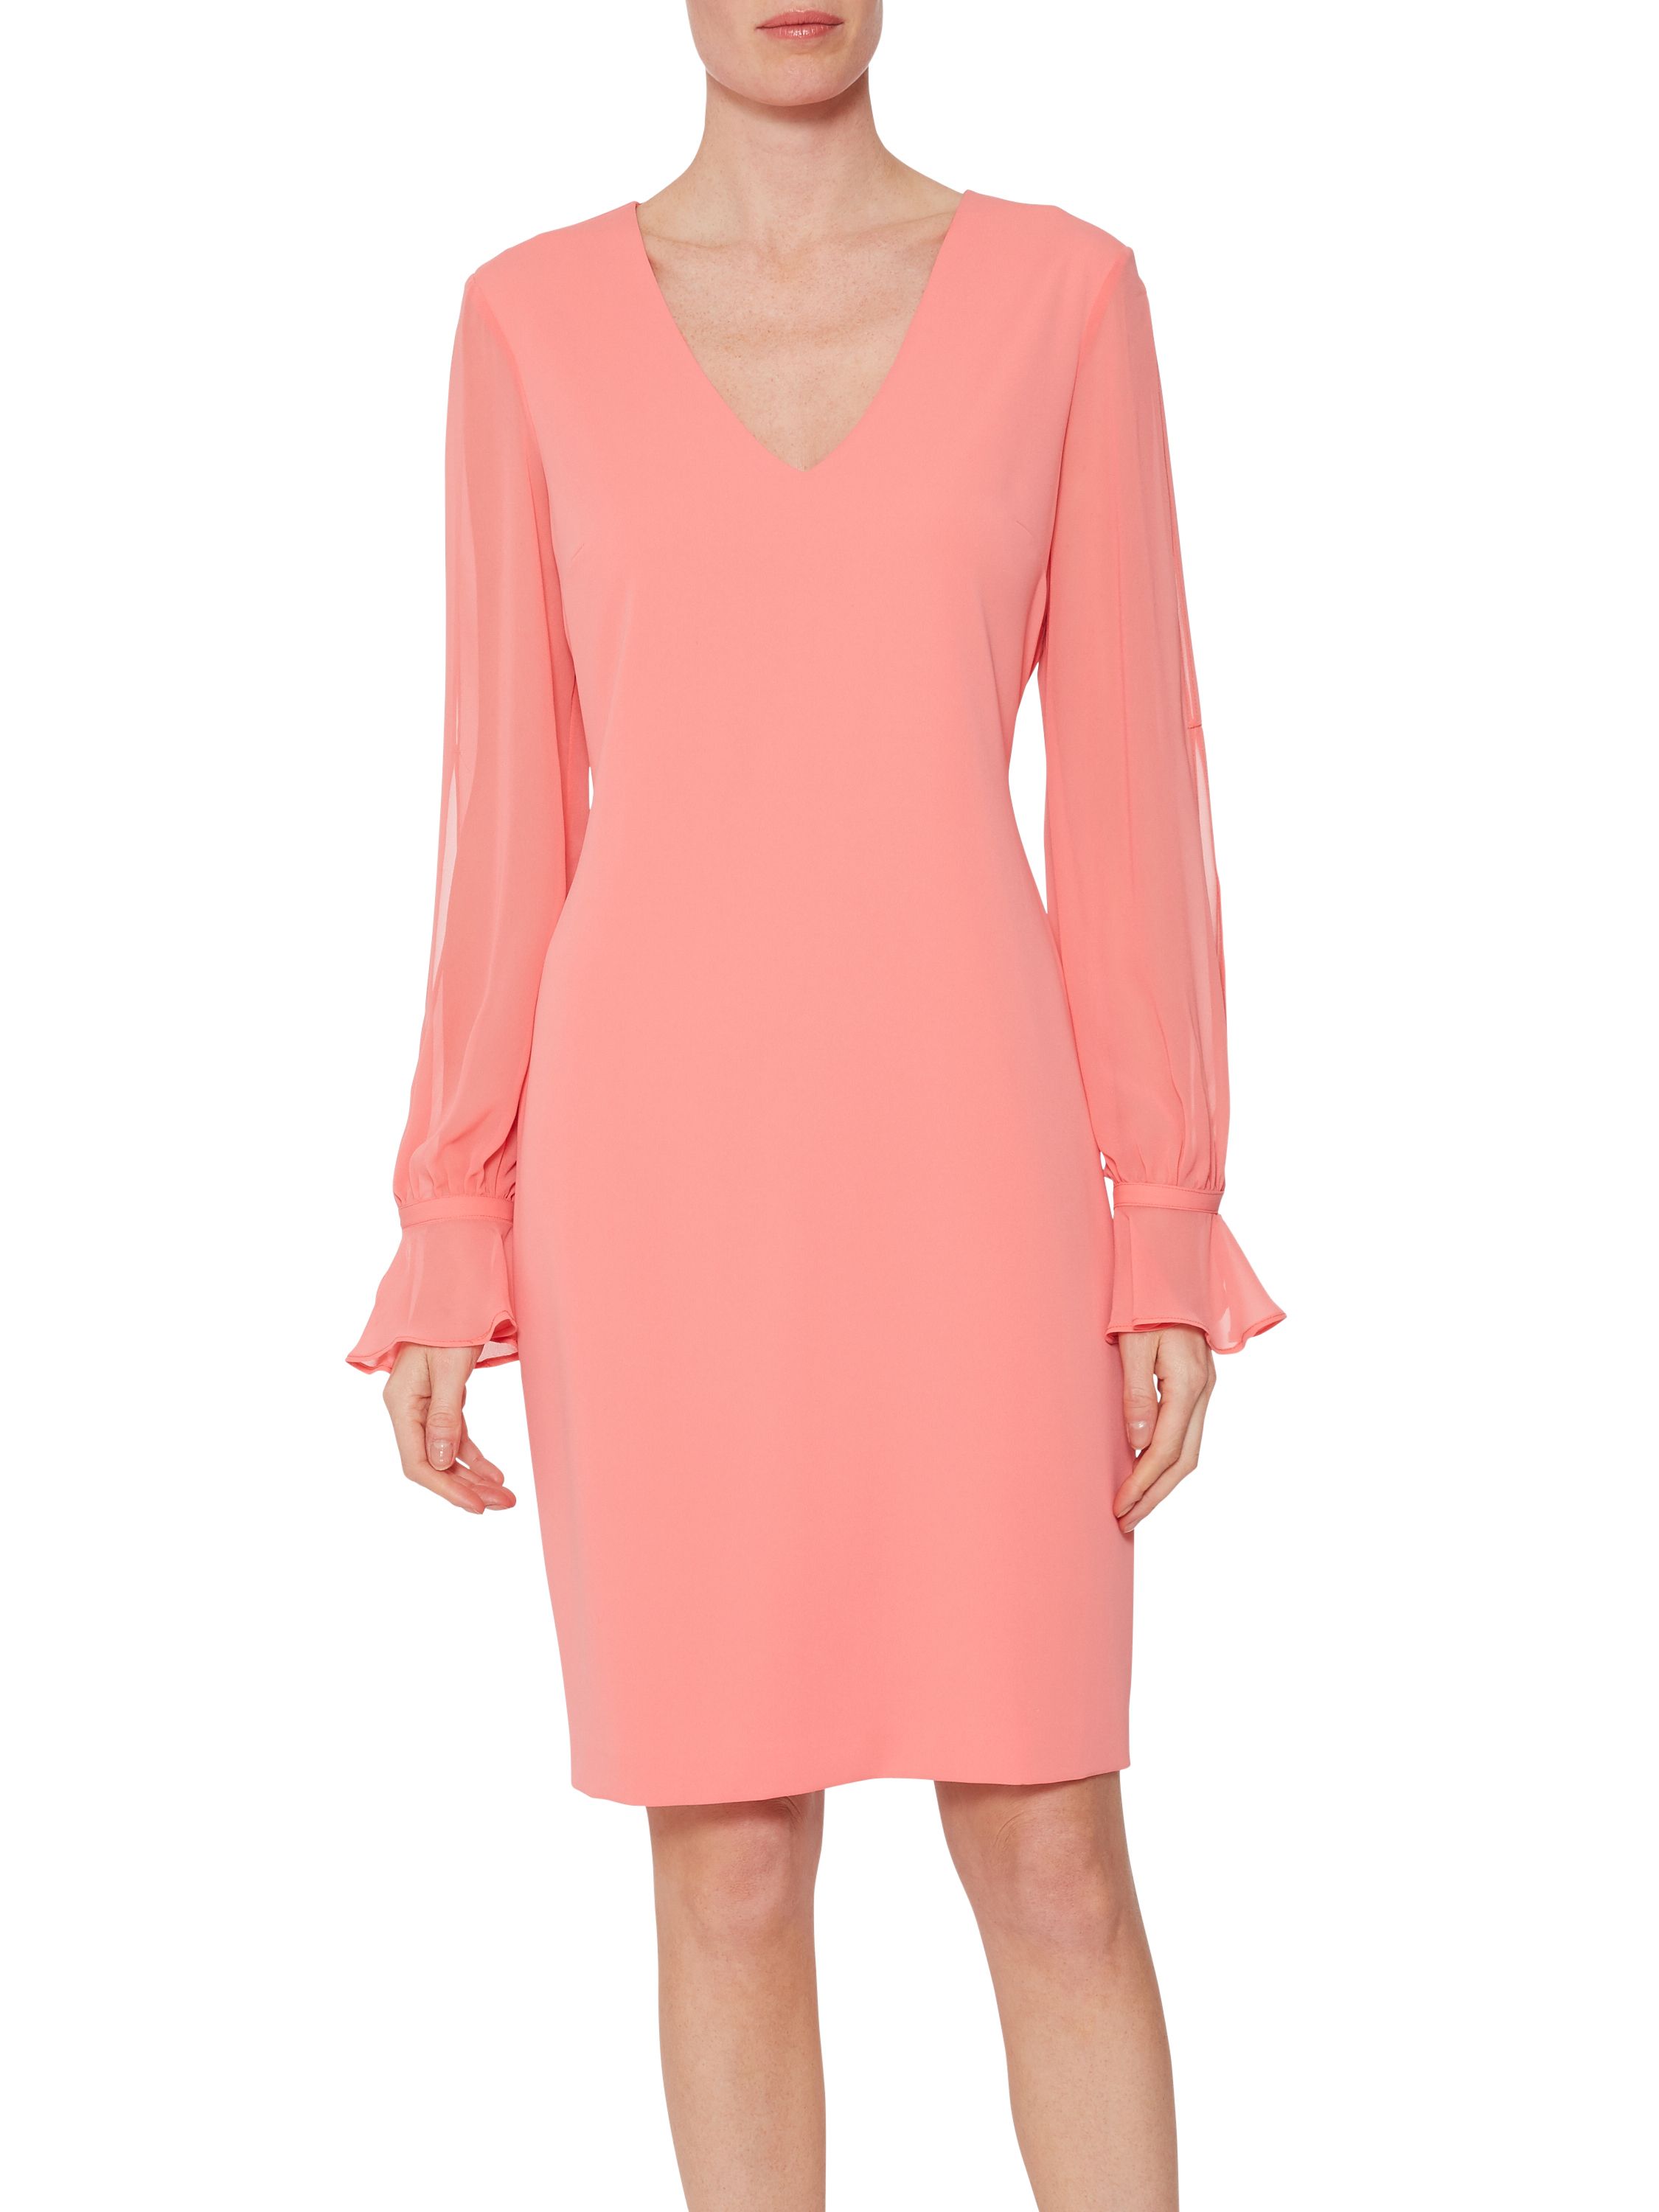 This crepe and chiffon dress by Gina Bacconi is a must-have piece this season. The dress takes a simple shift dress made out of crepe and features a stunning sheer chiffon sleeve which is finished with a dainty frill and is cuffed. With a V shaped neckline. The dress is fully lined and fastens with a concealed back zip.